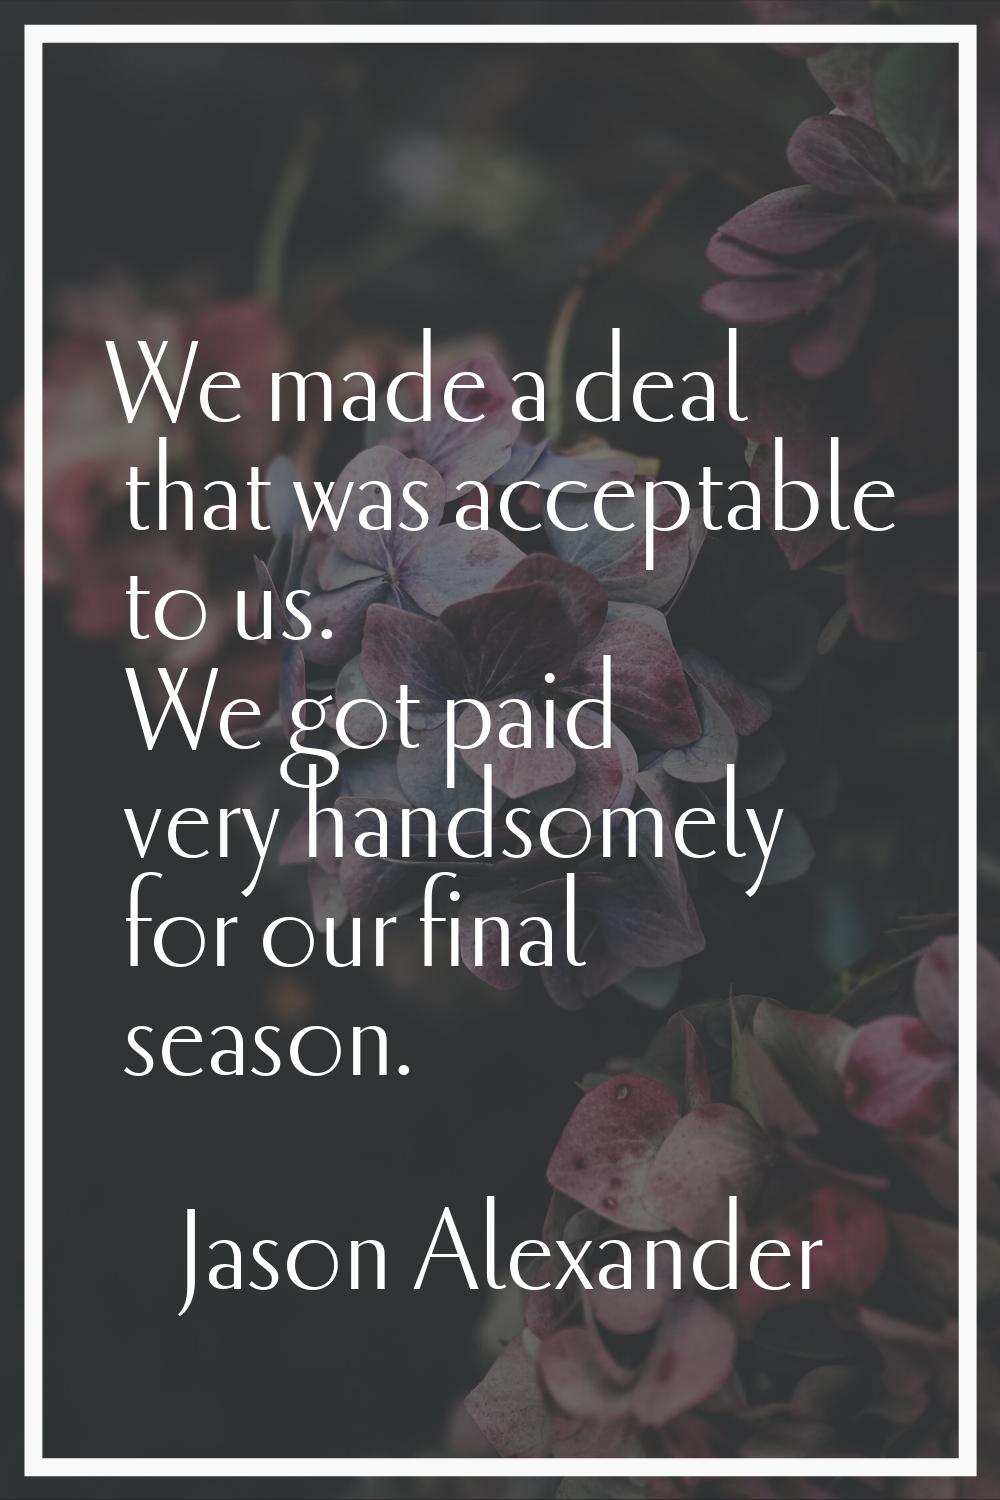 We made a deal that was acceptable to us. We got paid very handsomely for our final season.